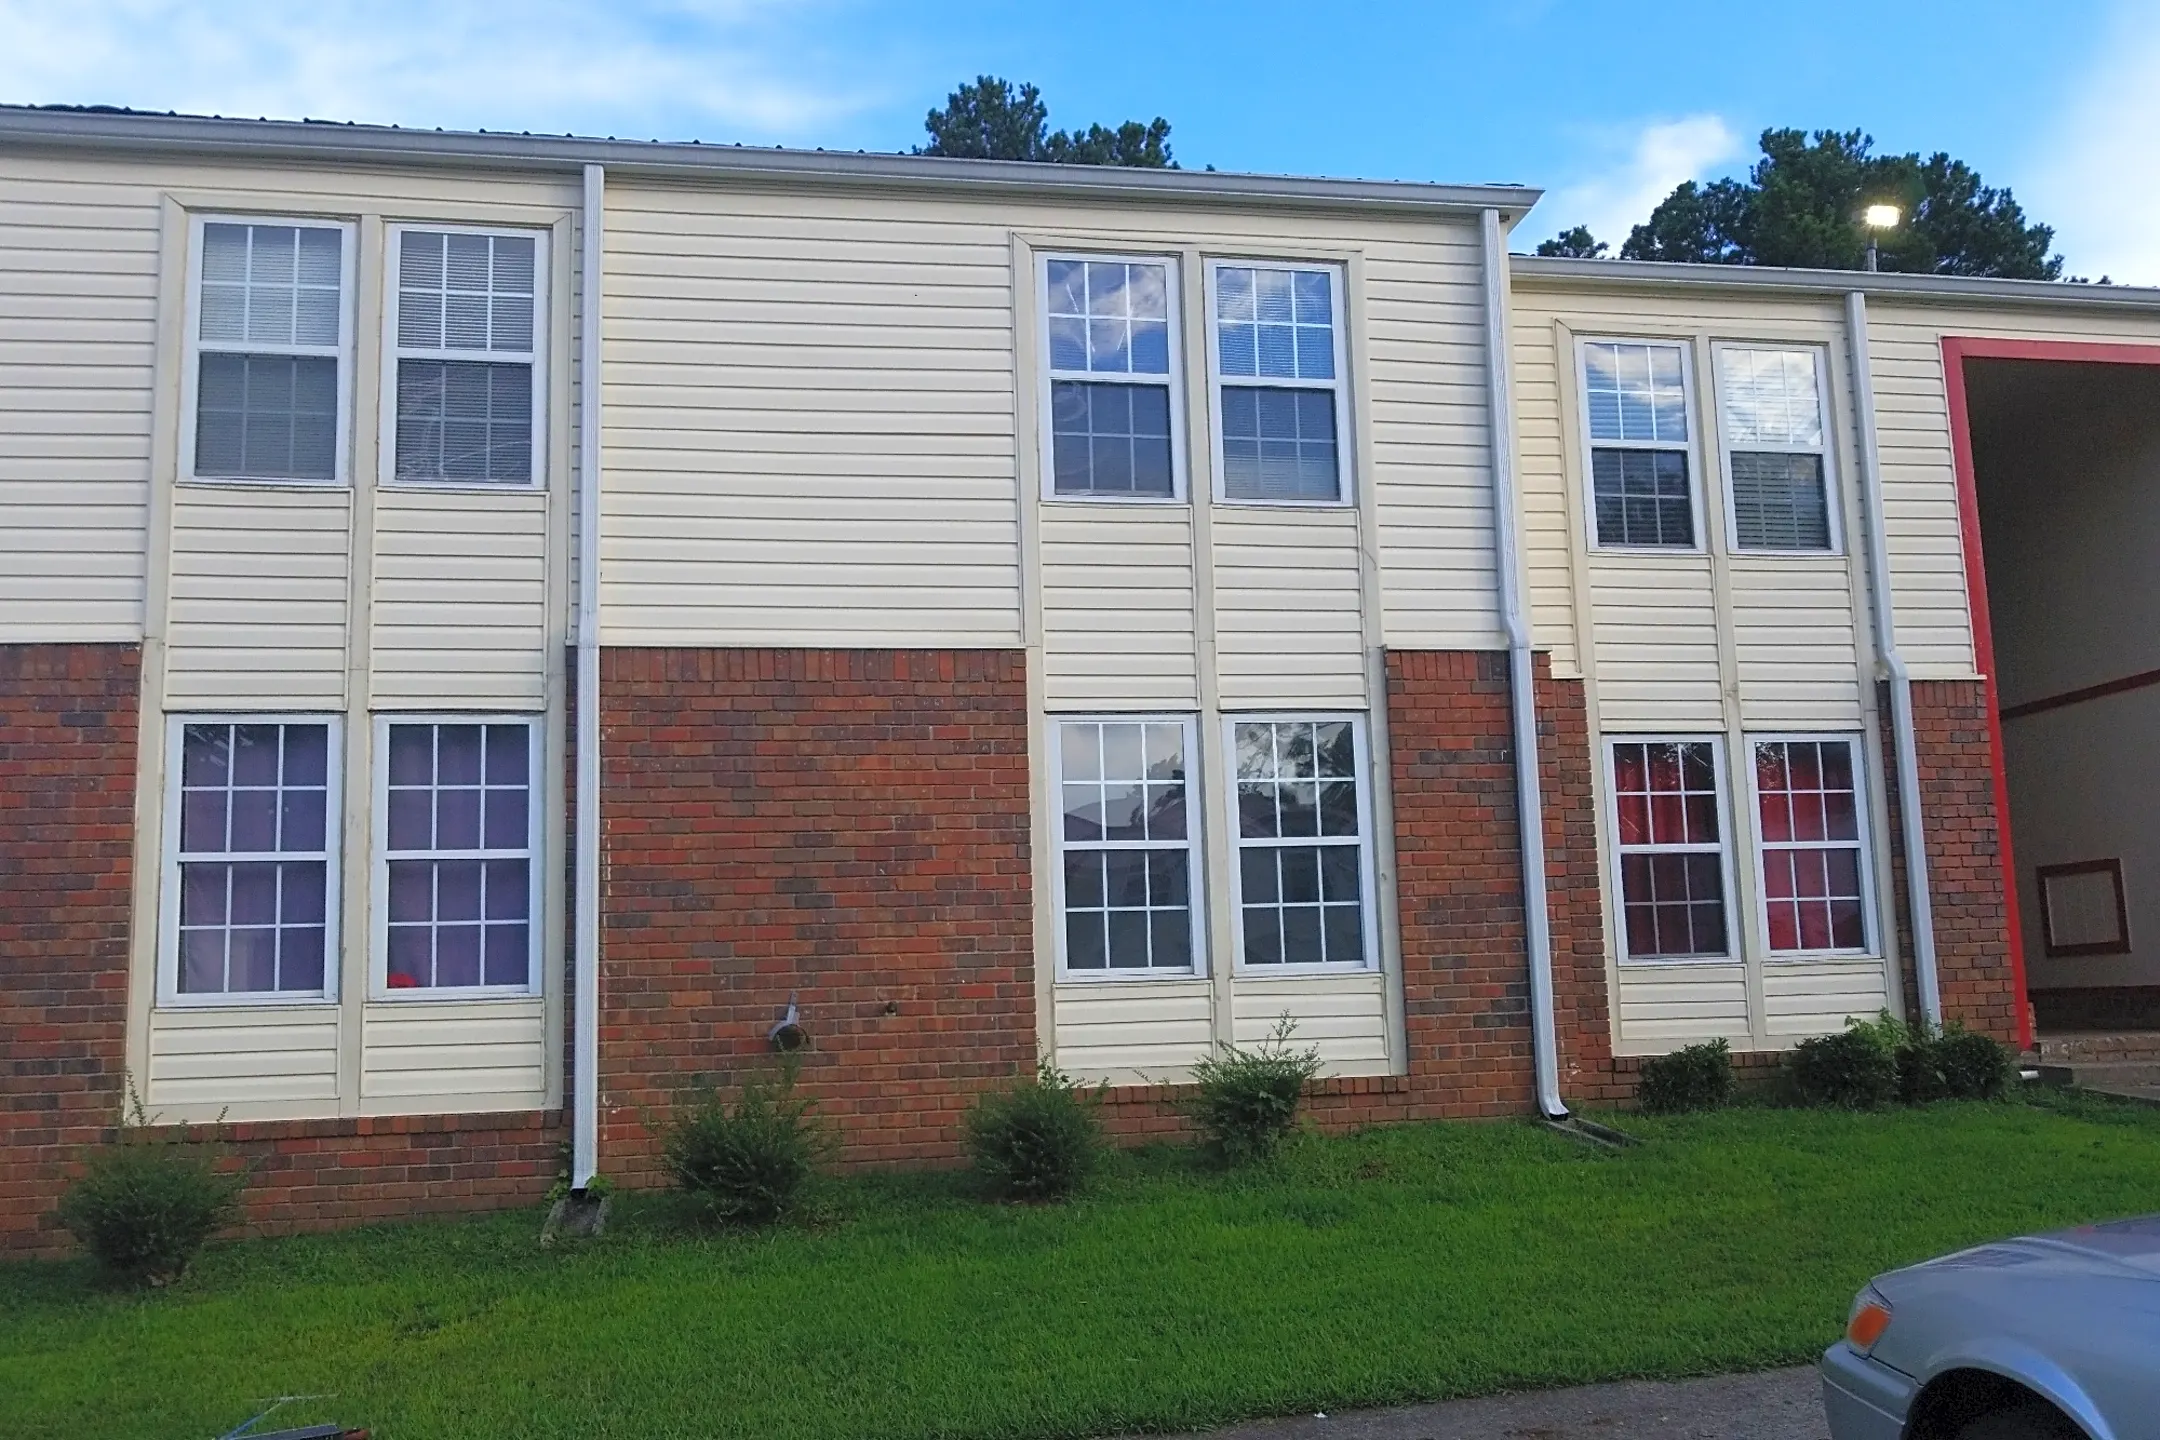 Pool - Deauville Apartments - Lawrenceville, GA